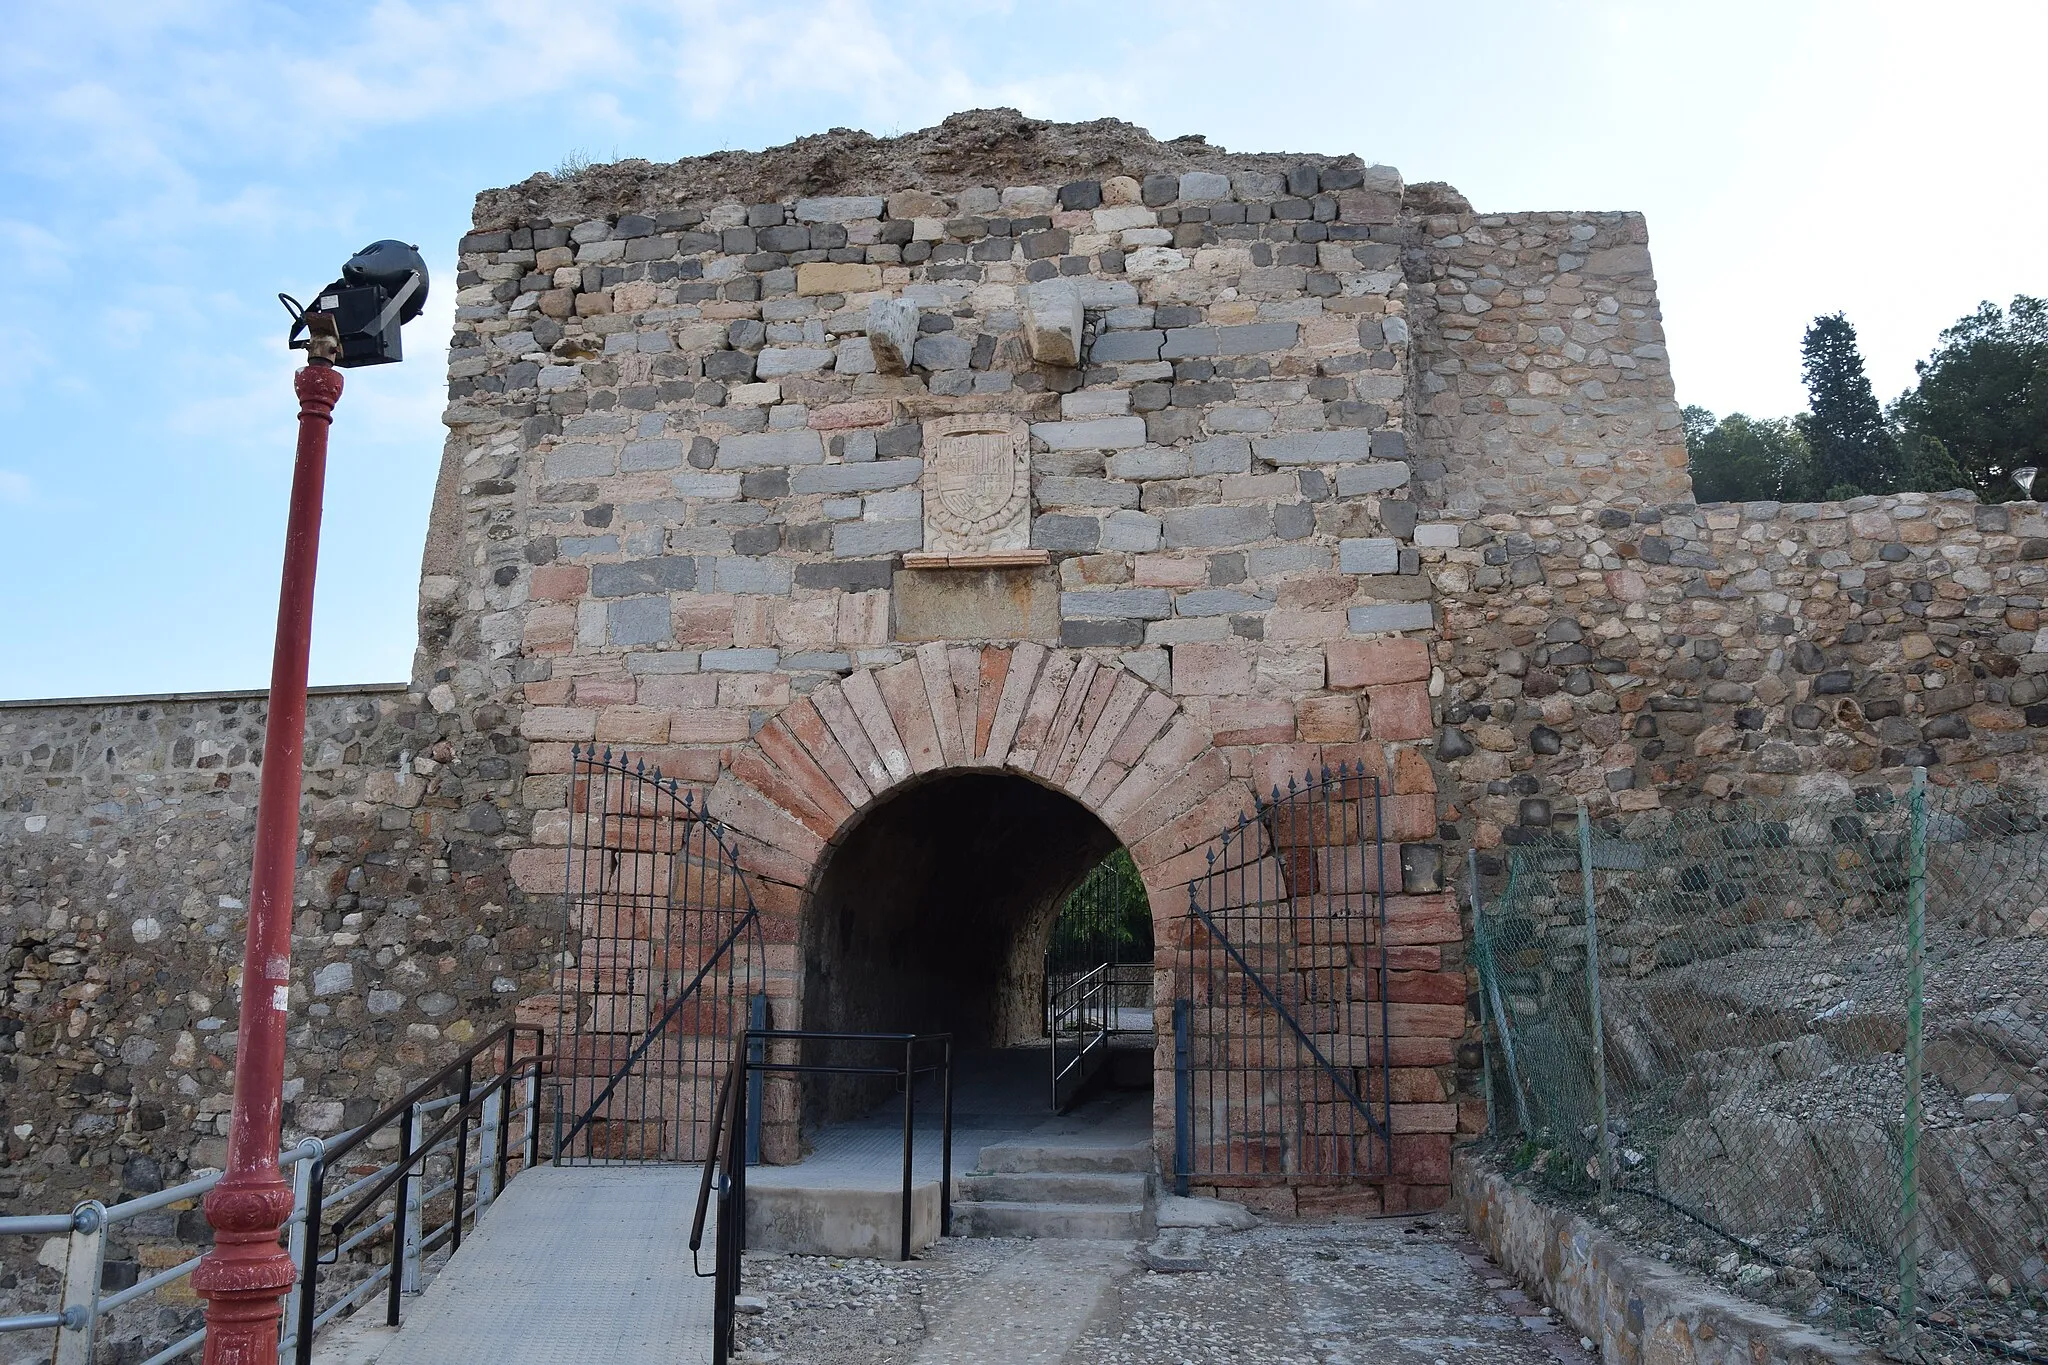 Photo showing: The monumental gate popularly known as Puerta de la Villa, work of the military engineer Giovanni Battista Antonelli in 1570. The gate is inserted in the group known as "Ruins and archaeological remains of the Cerro de la Concepción", and gives access to the castle of the same name.